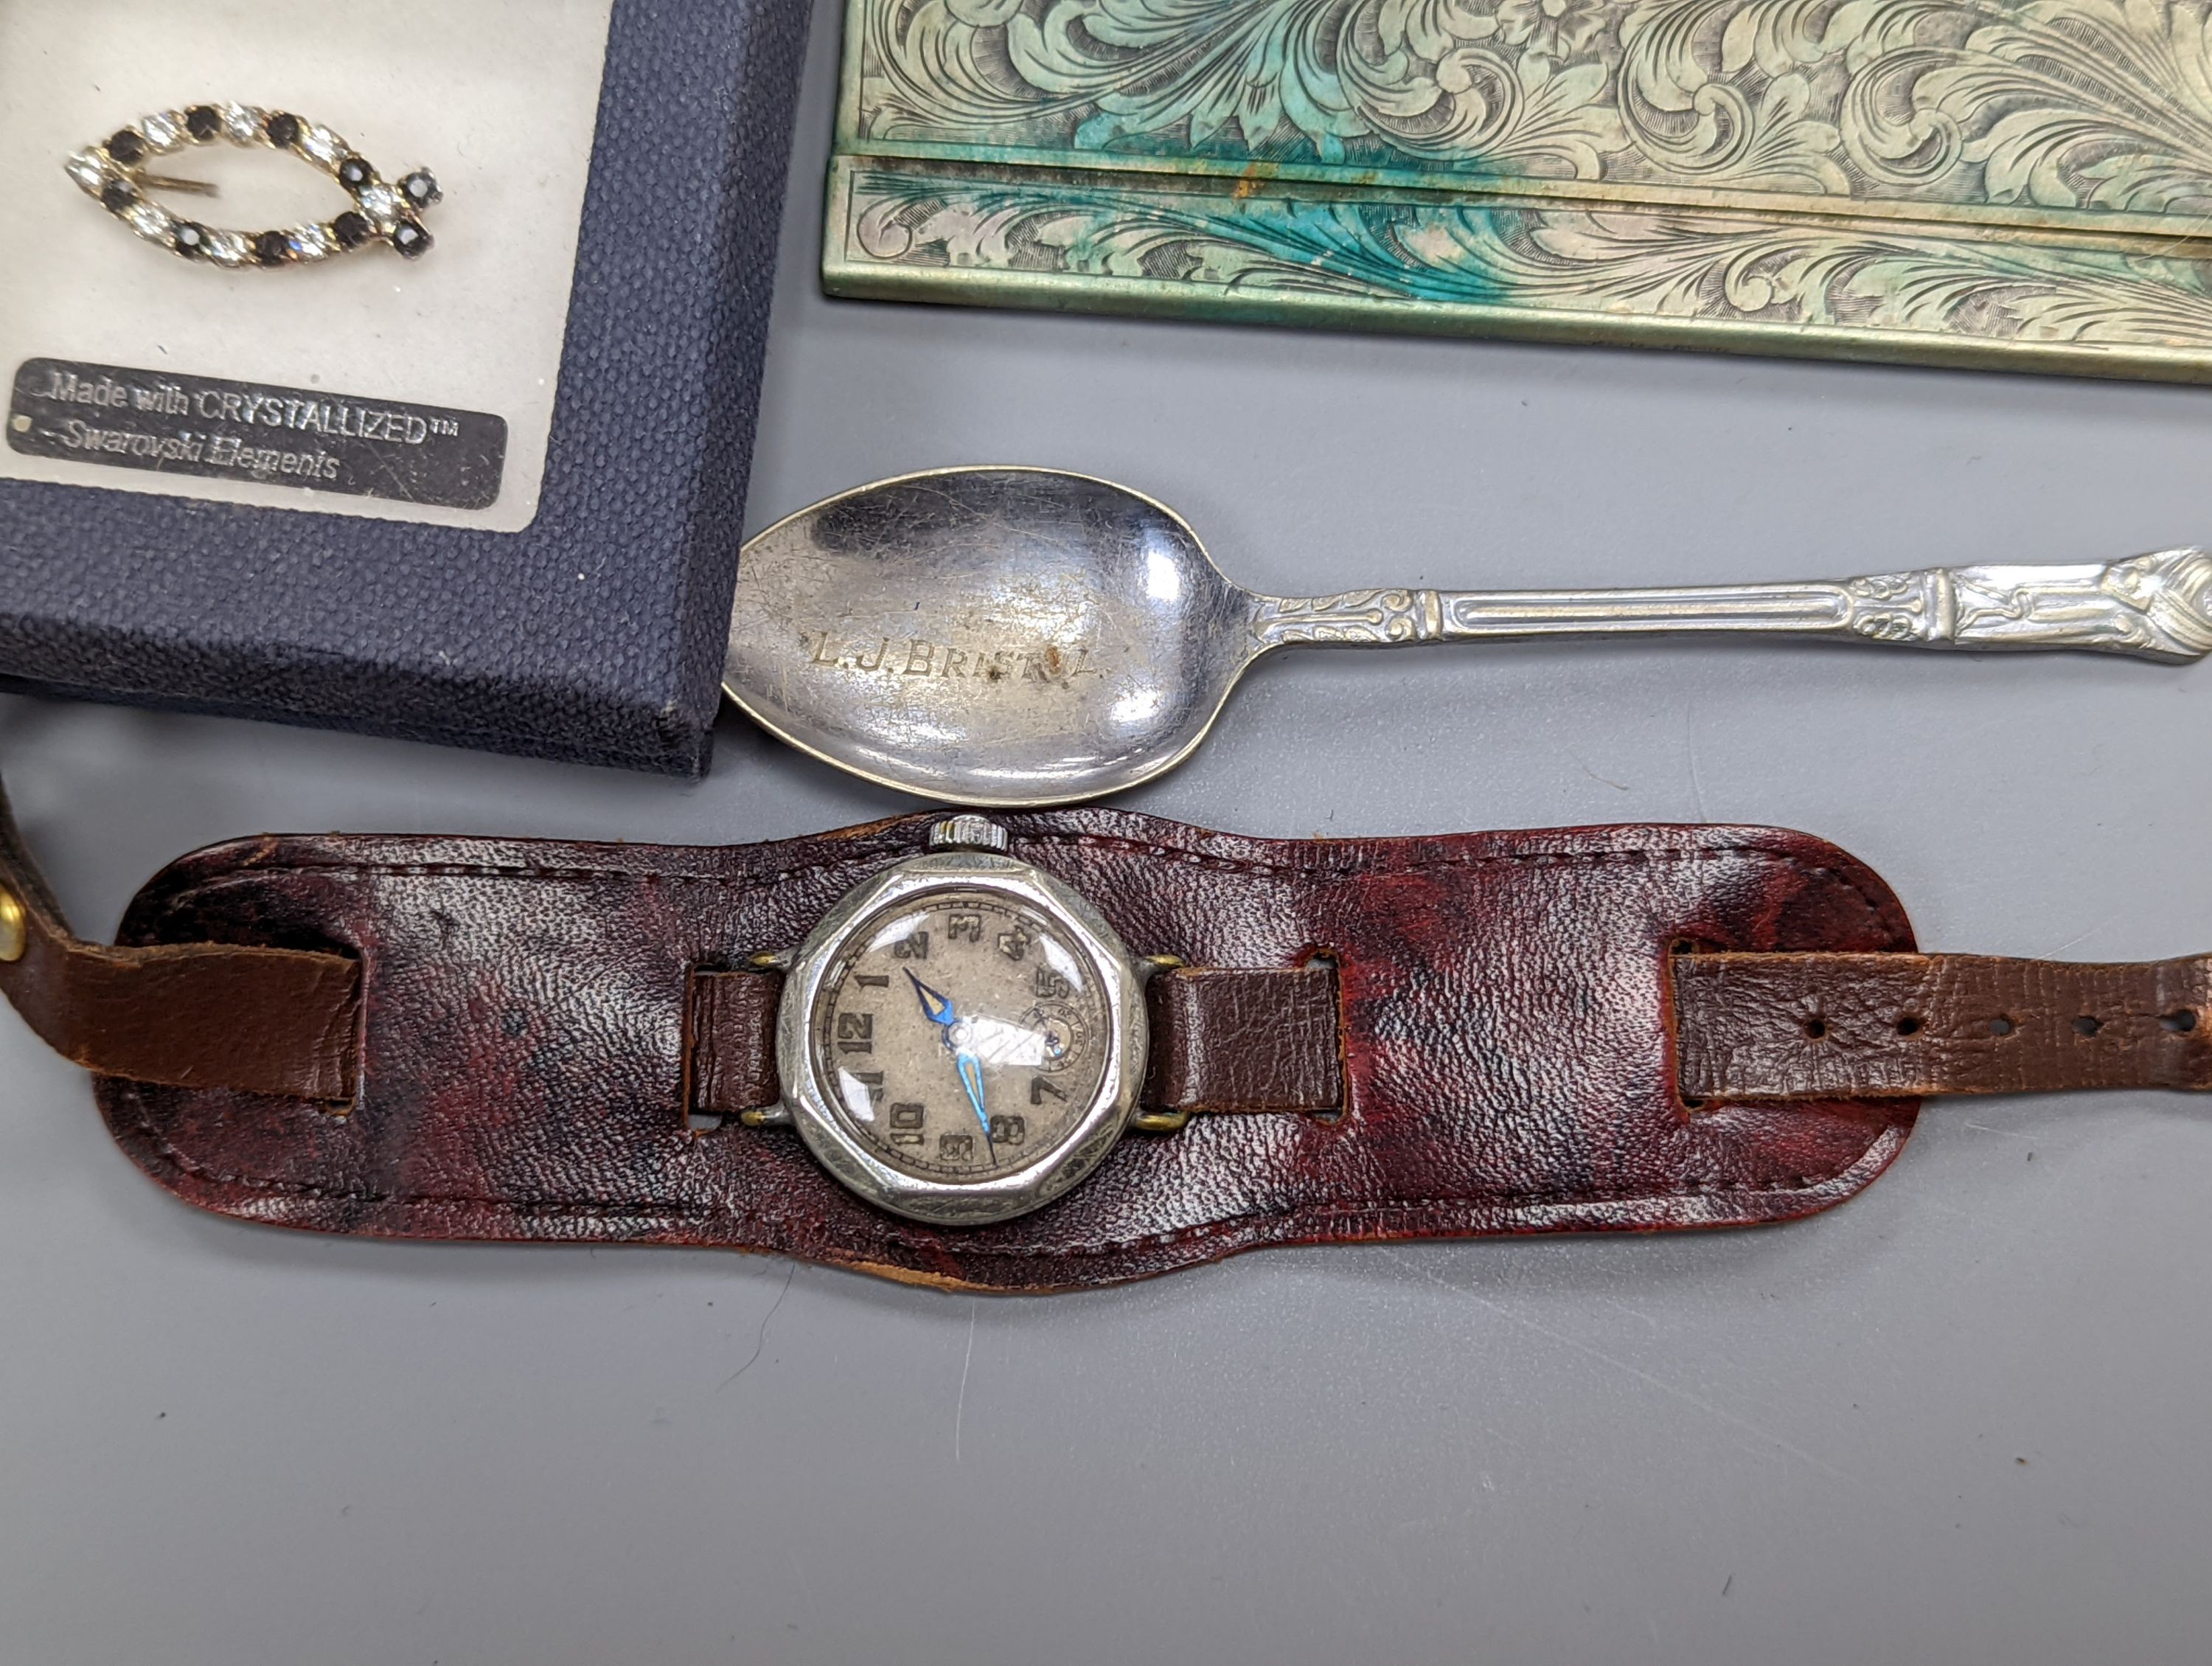 Miscellaneous items including a railway watch